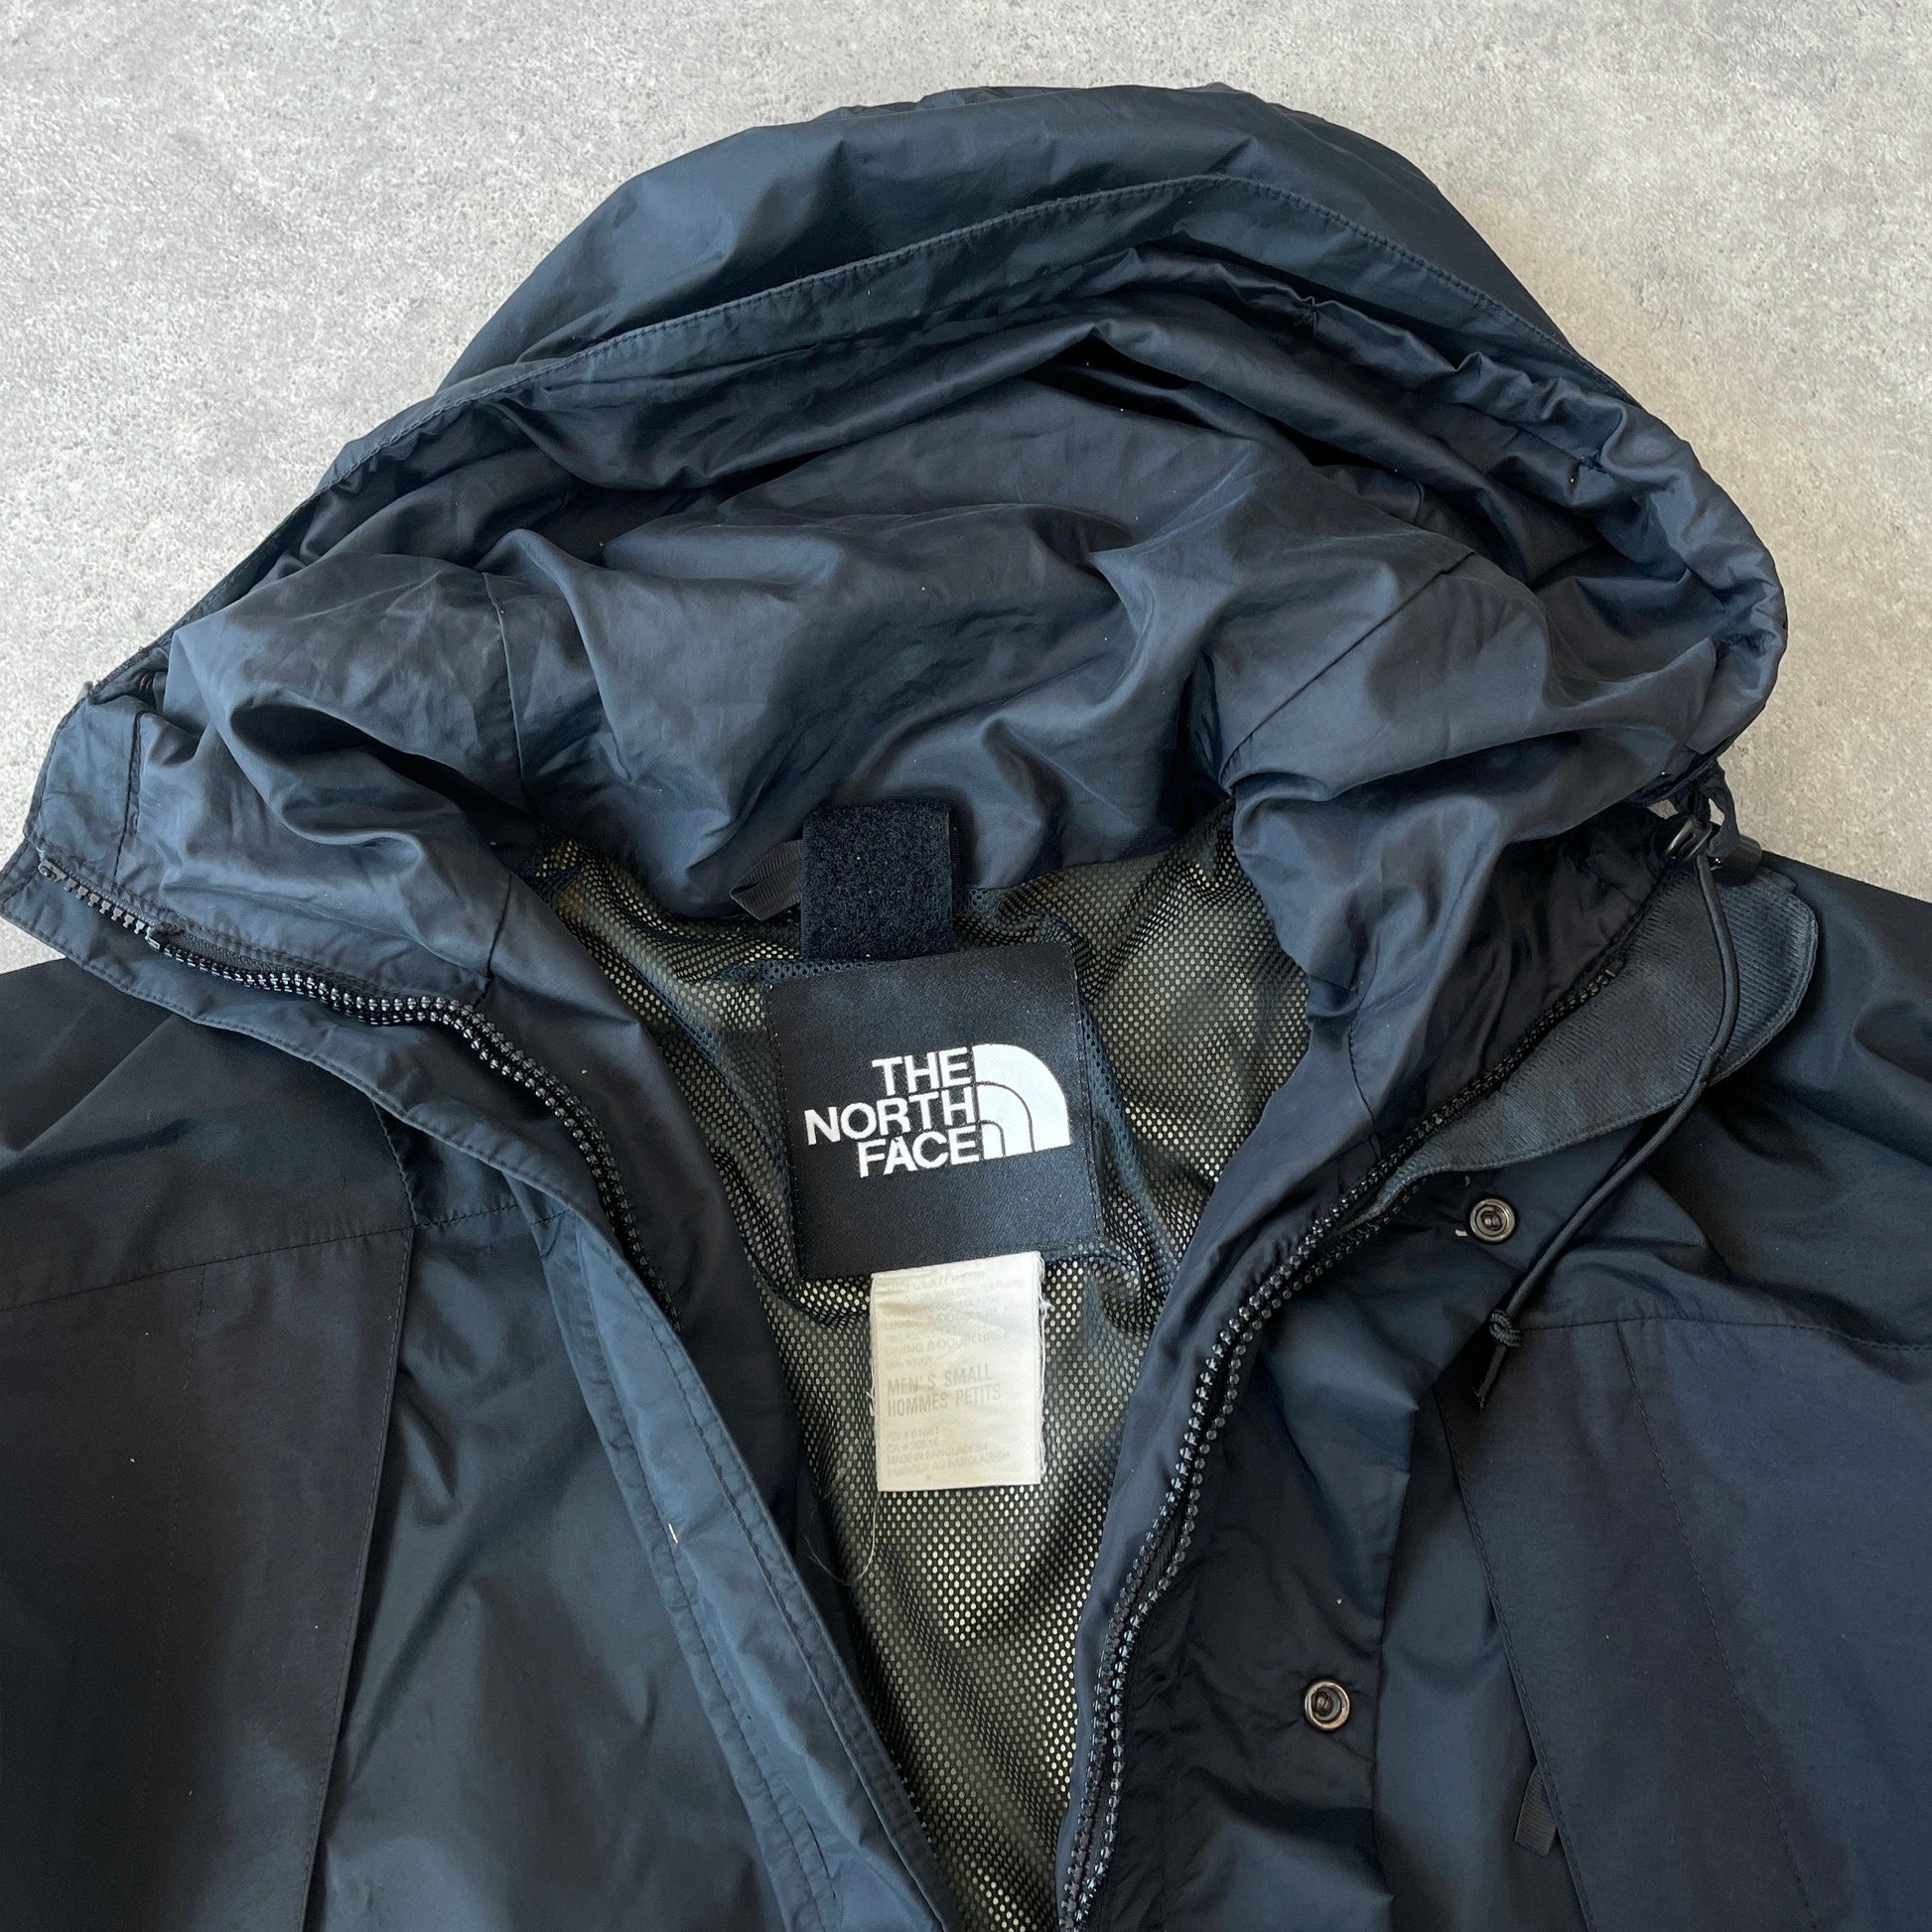 The North Face 1990s Gore-tex mountain jacket (S) - Known Source